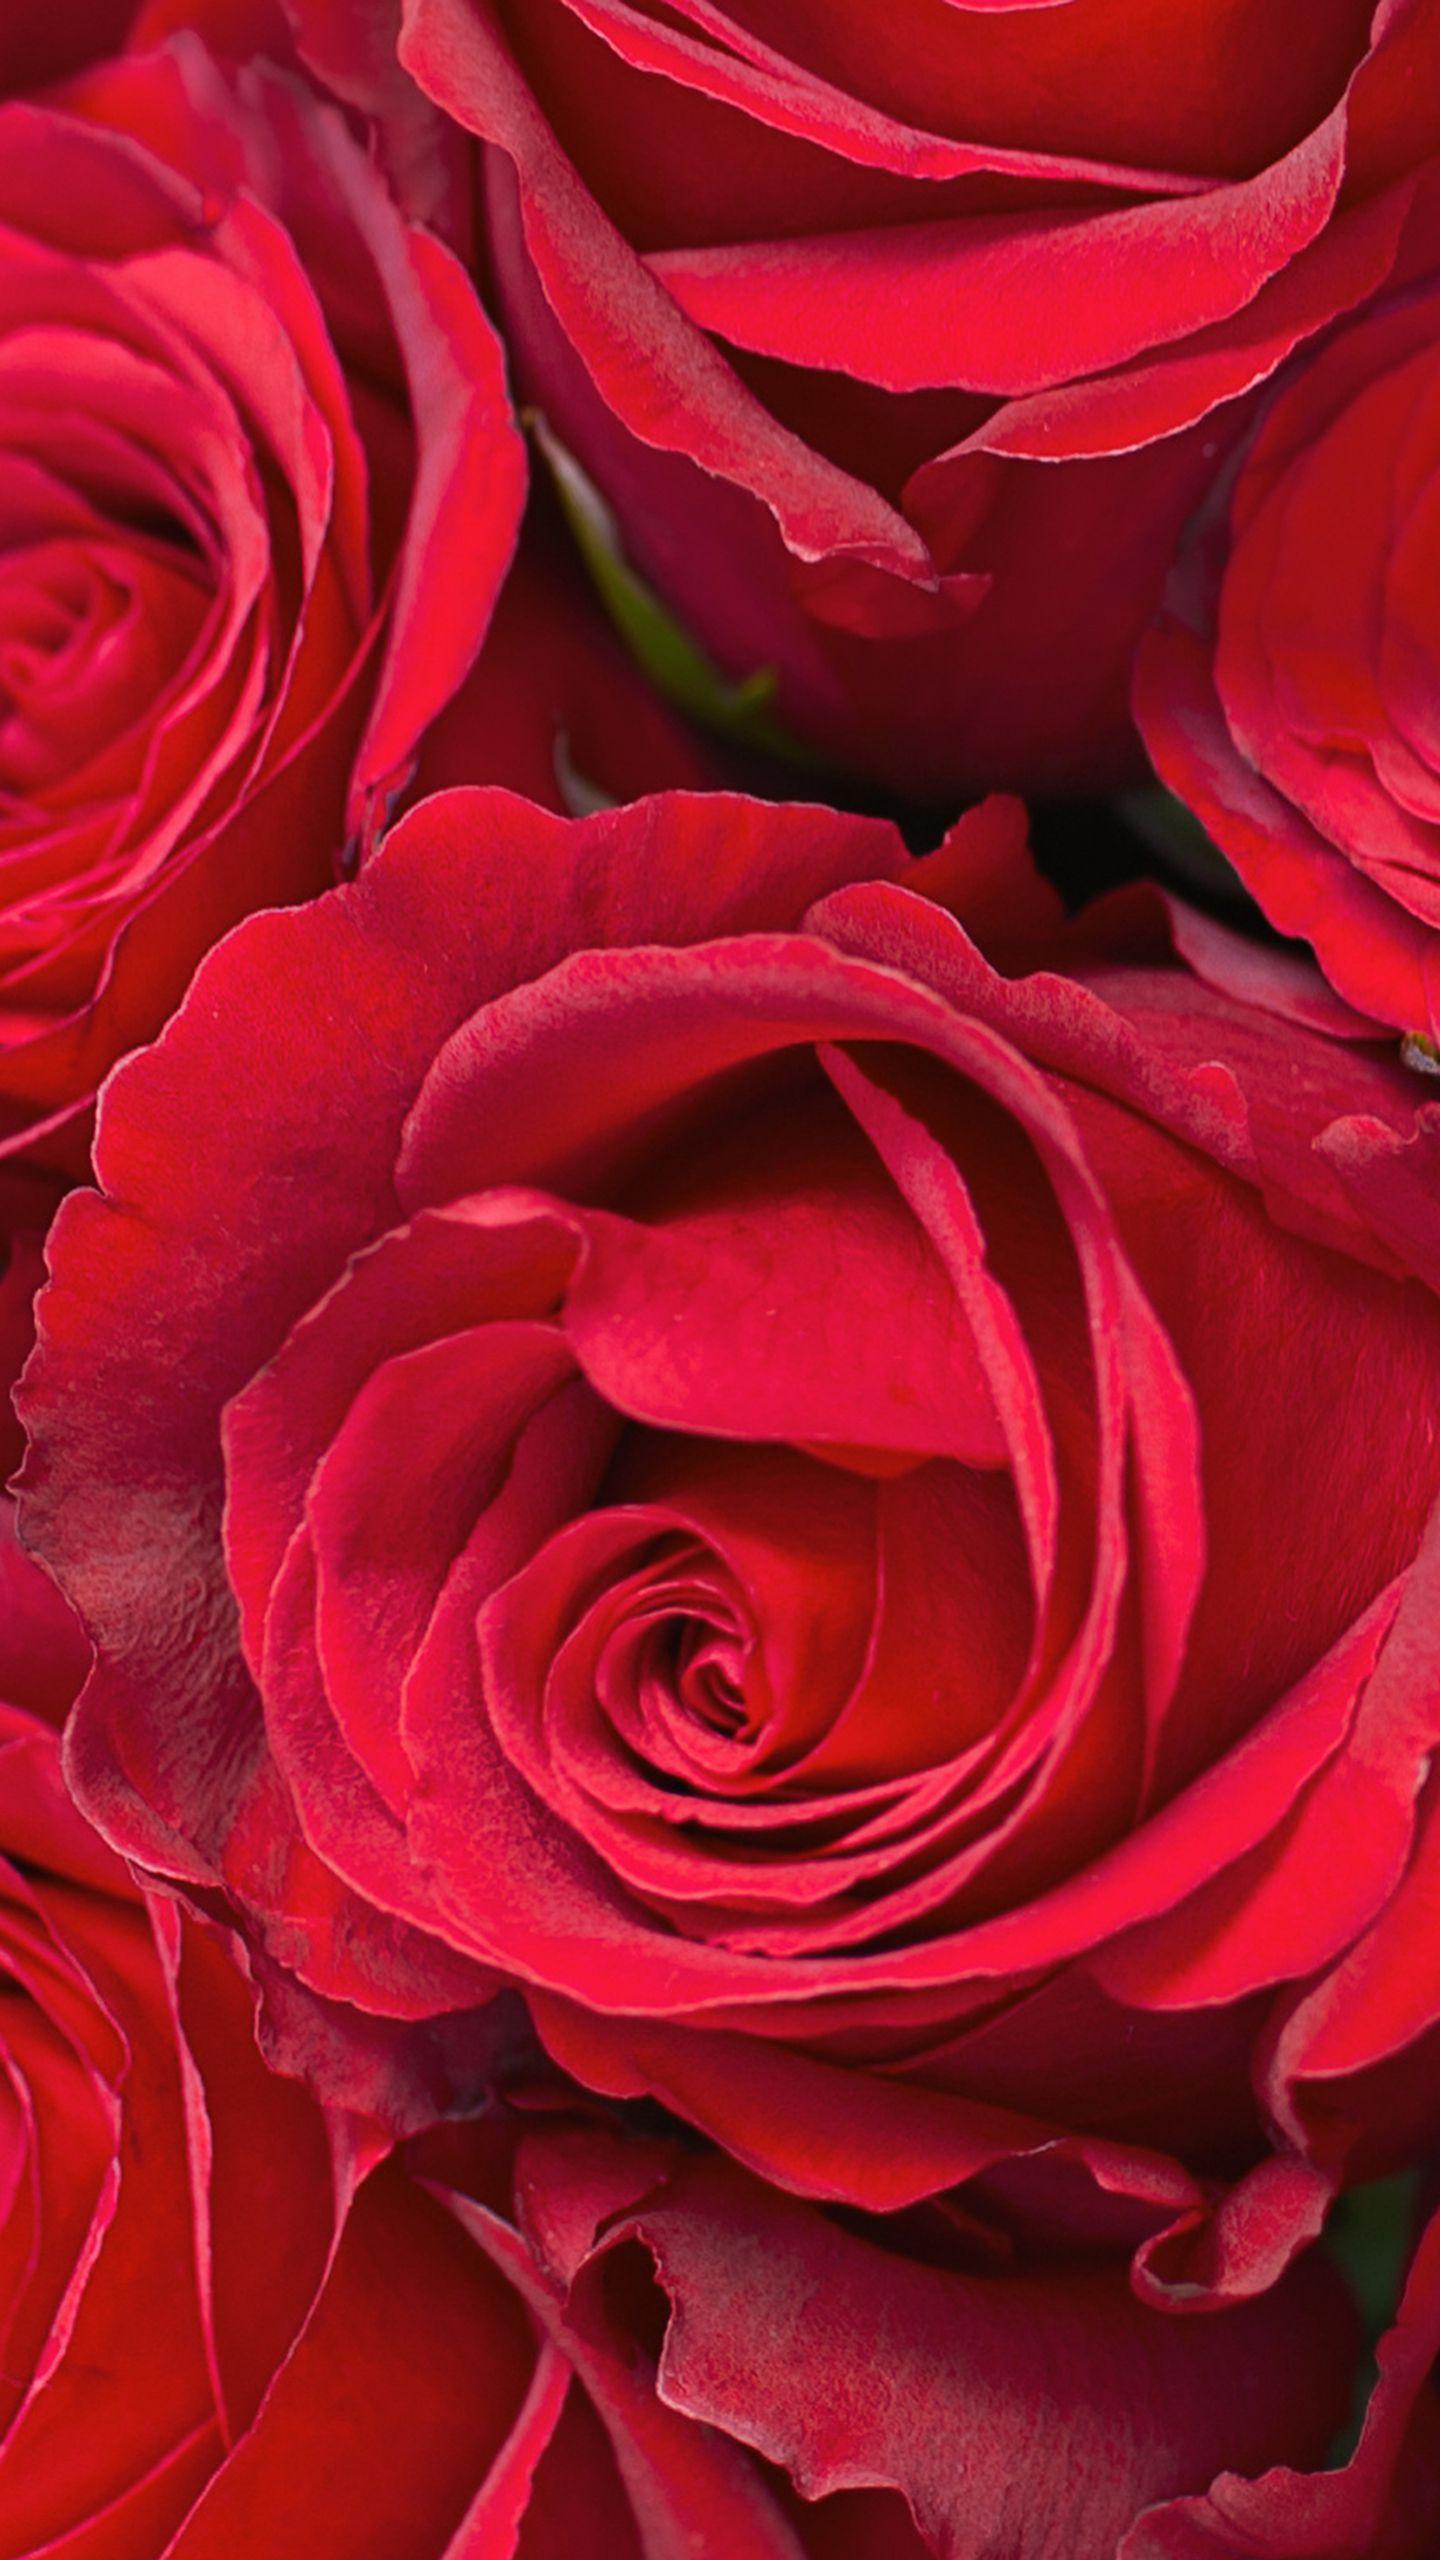 Samsung Galaxy S7 Red Roses Wallpaper Quality Image And Transparent PNG Free Clipart